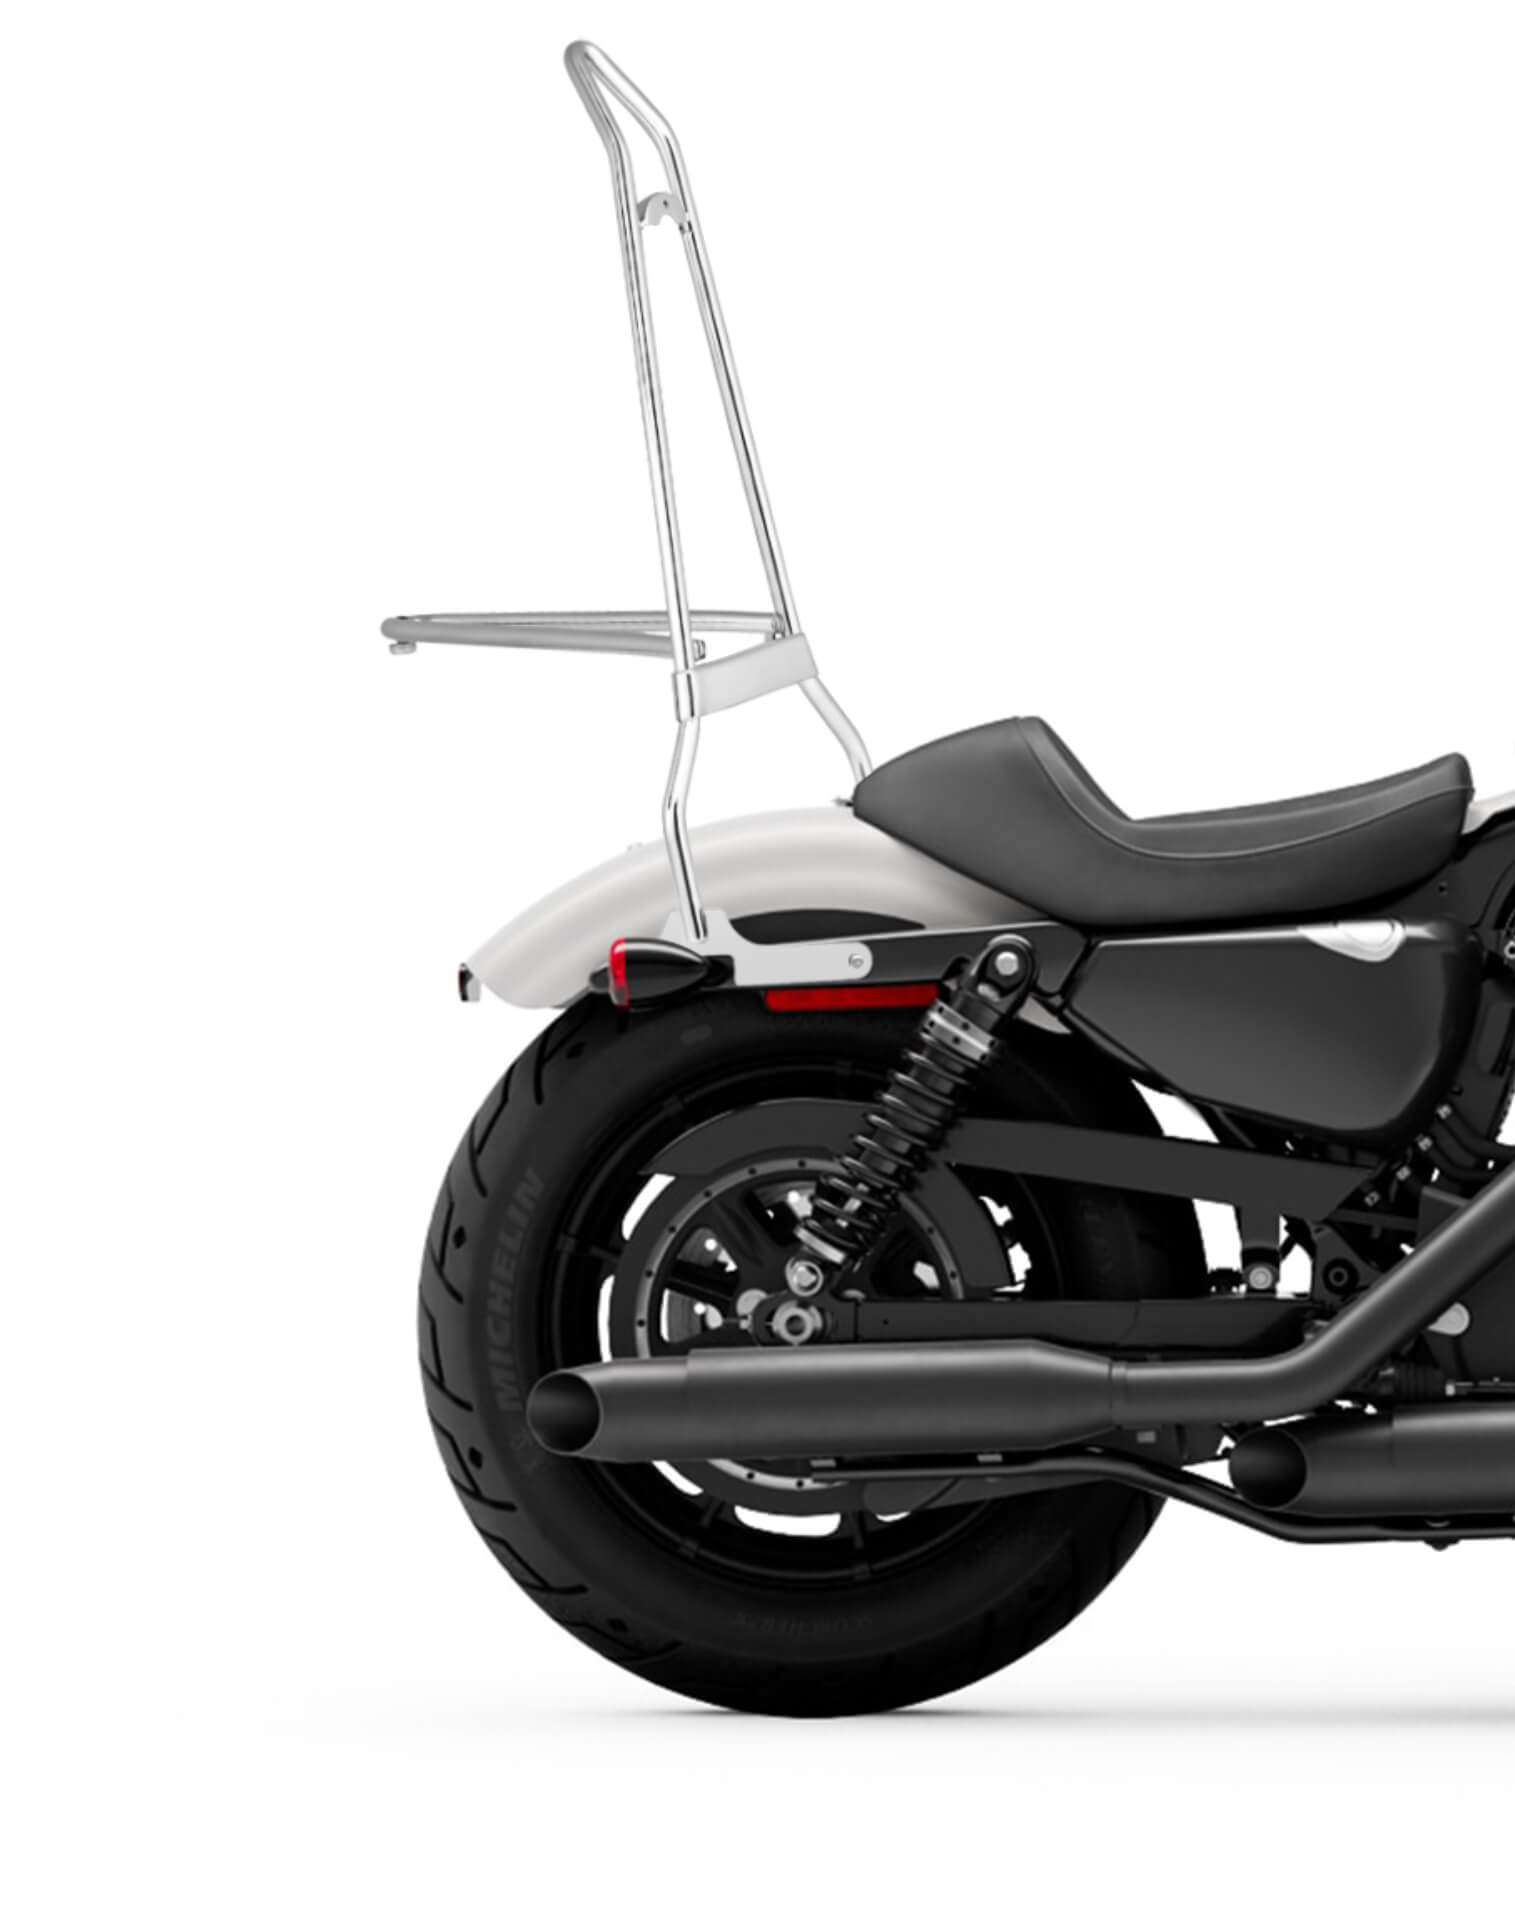 Iron Born Blade 25" Sissy Bar with Foldable Luggage Rack for Harley Sportster Iron 1200 Chrome Close Up View